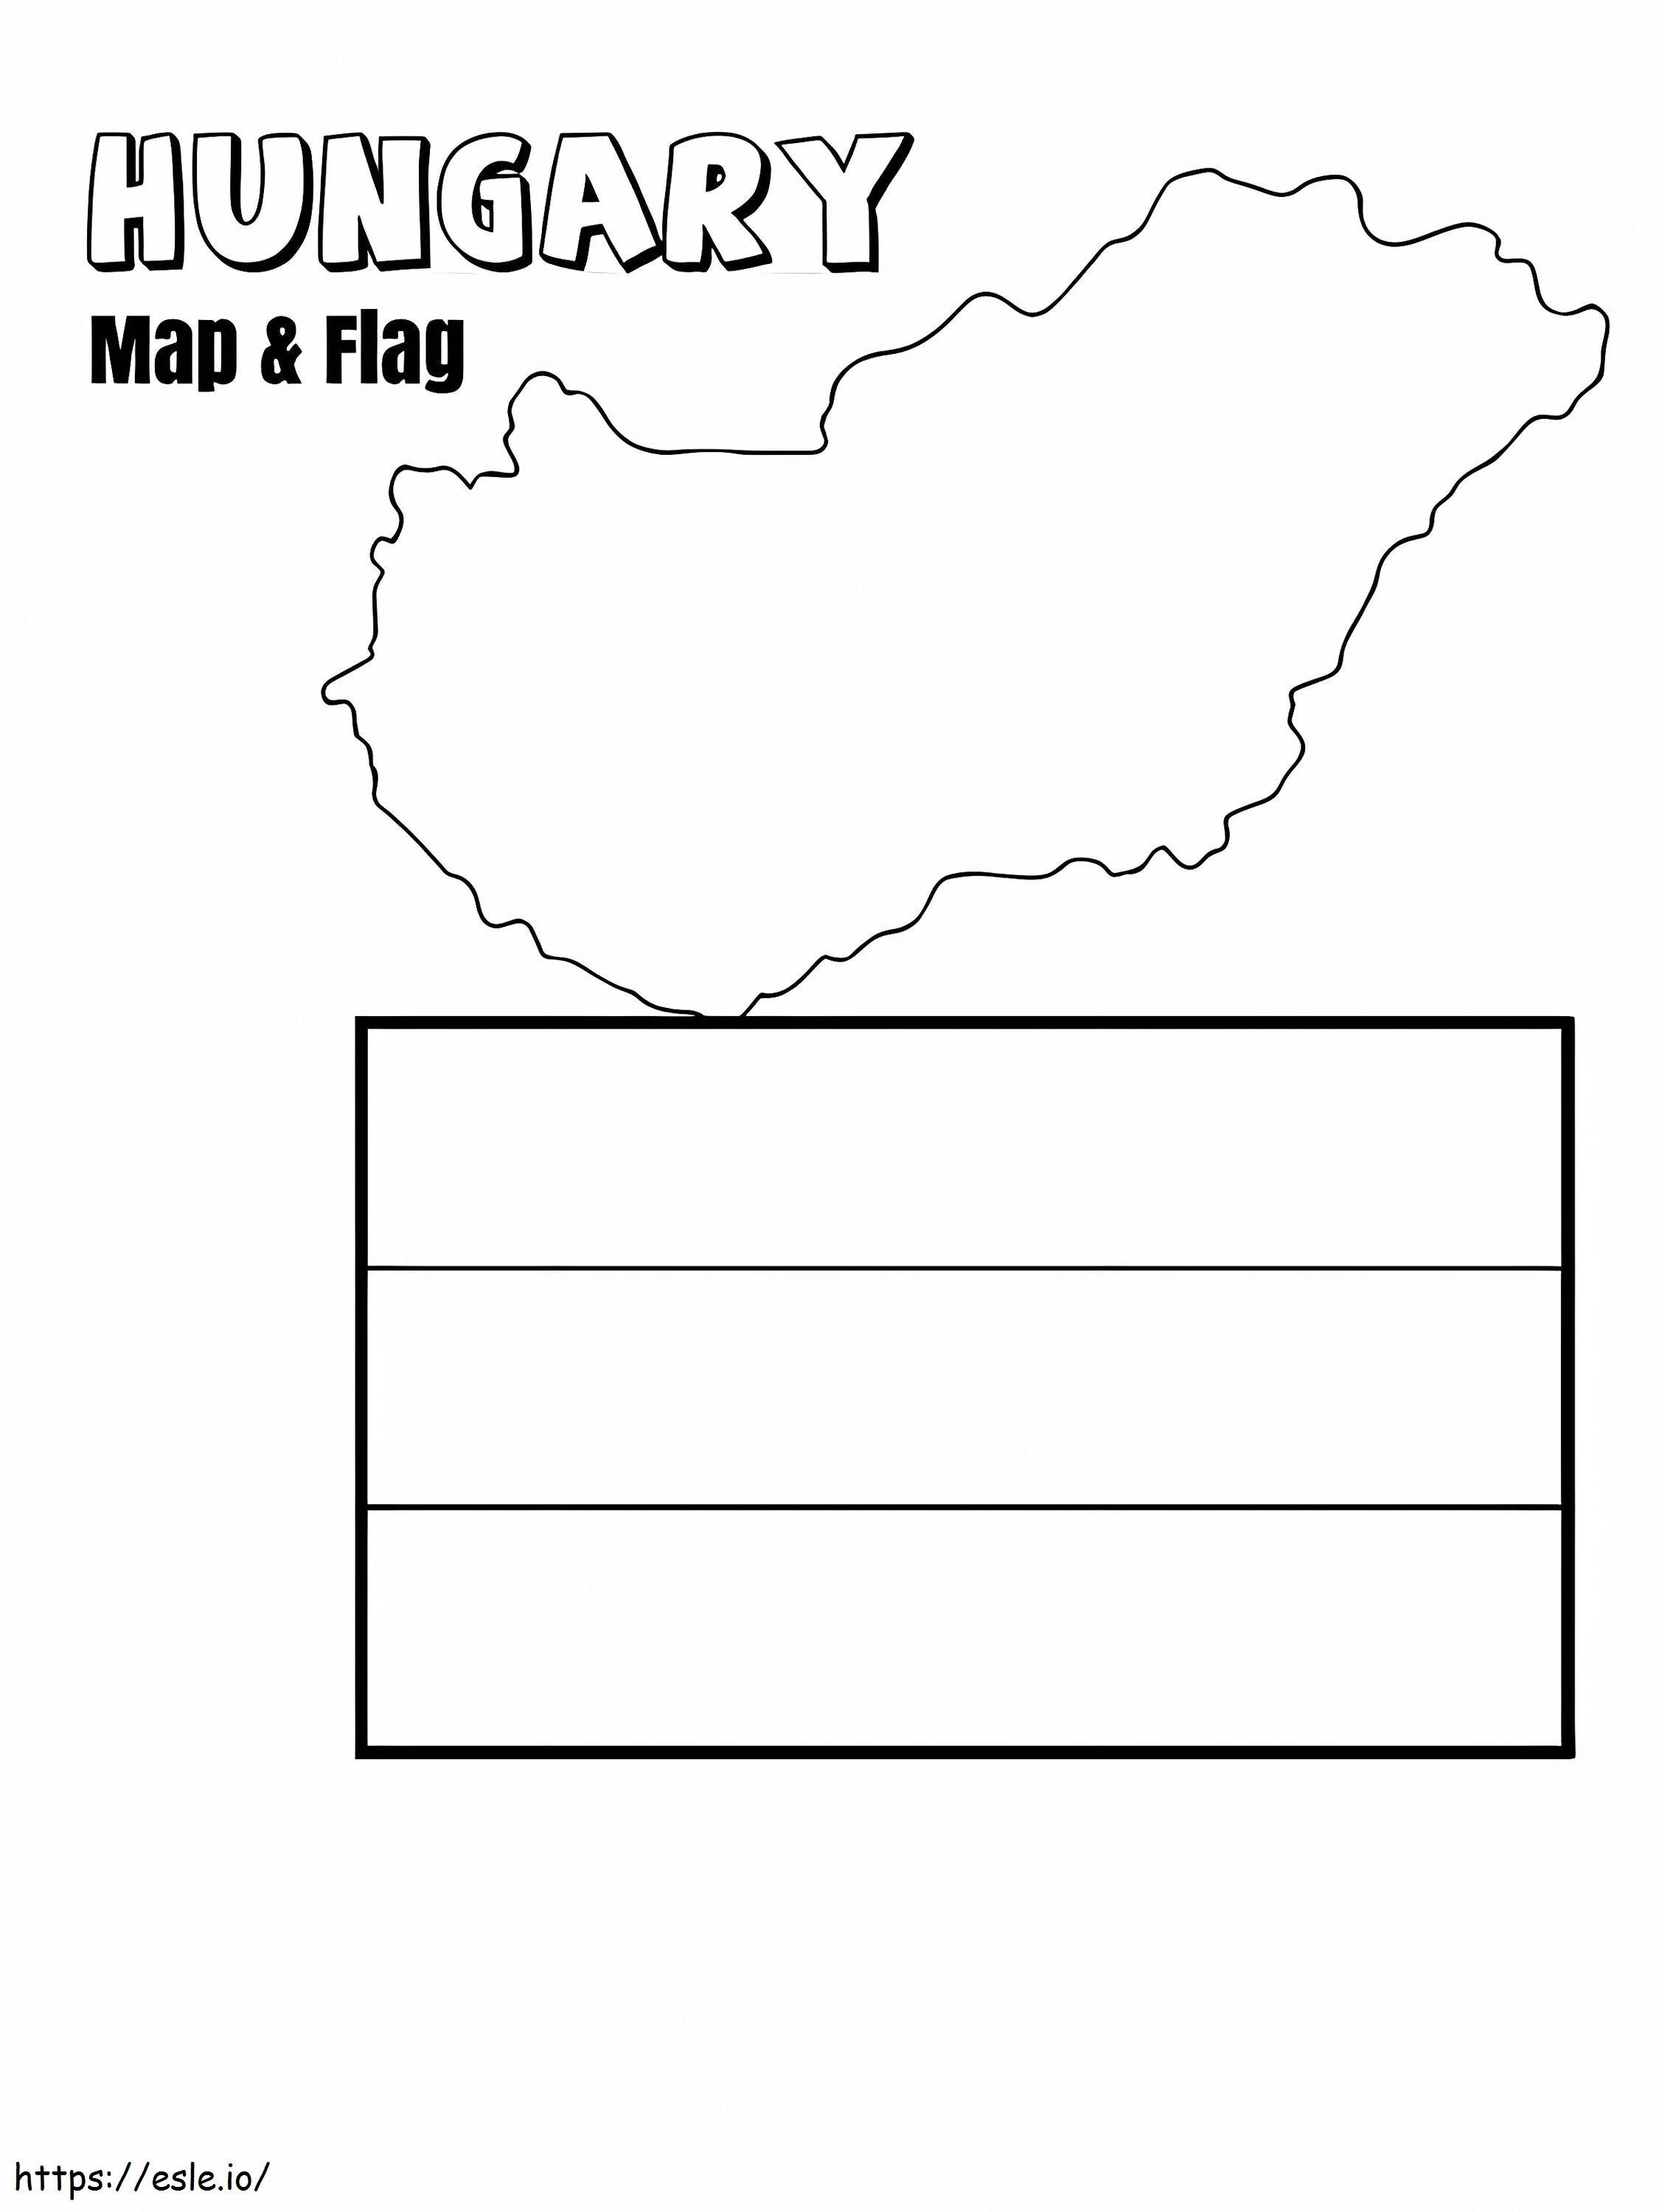 Hungary Map And Flag coloring page